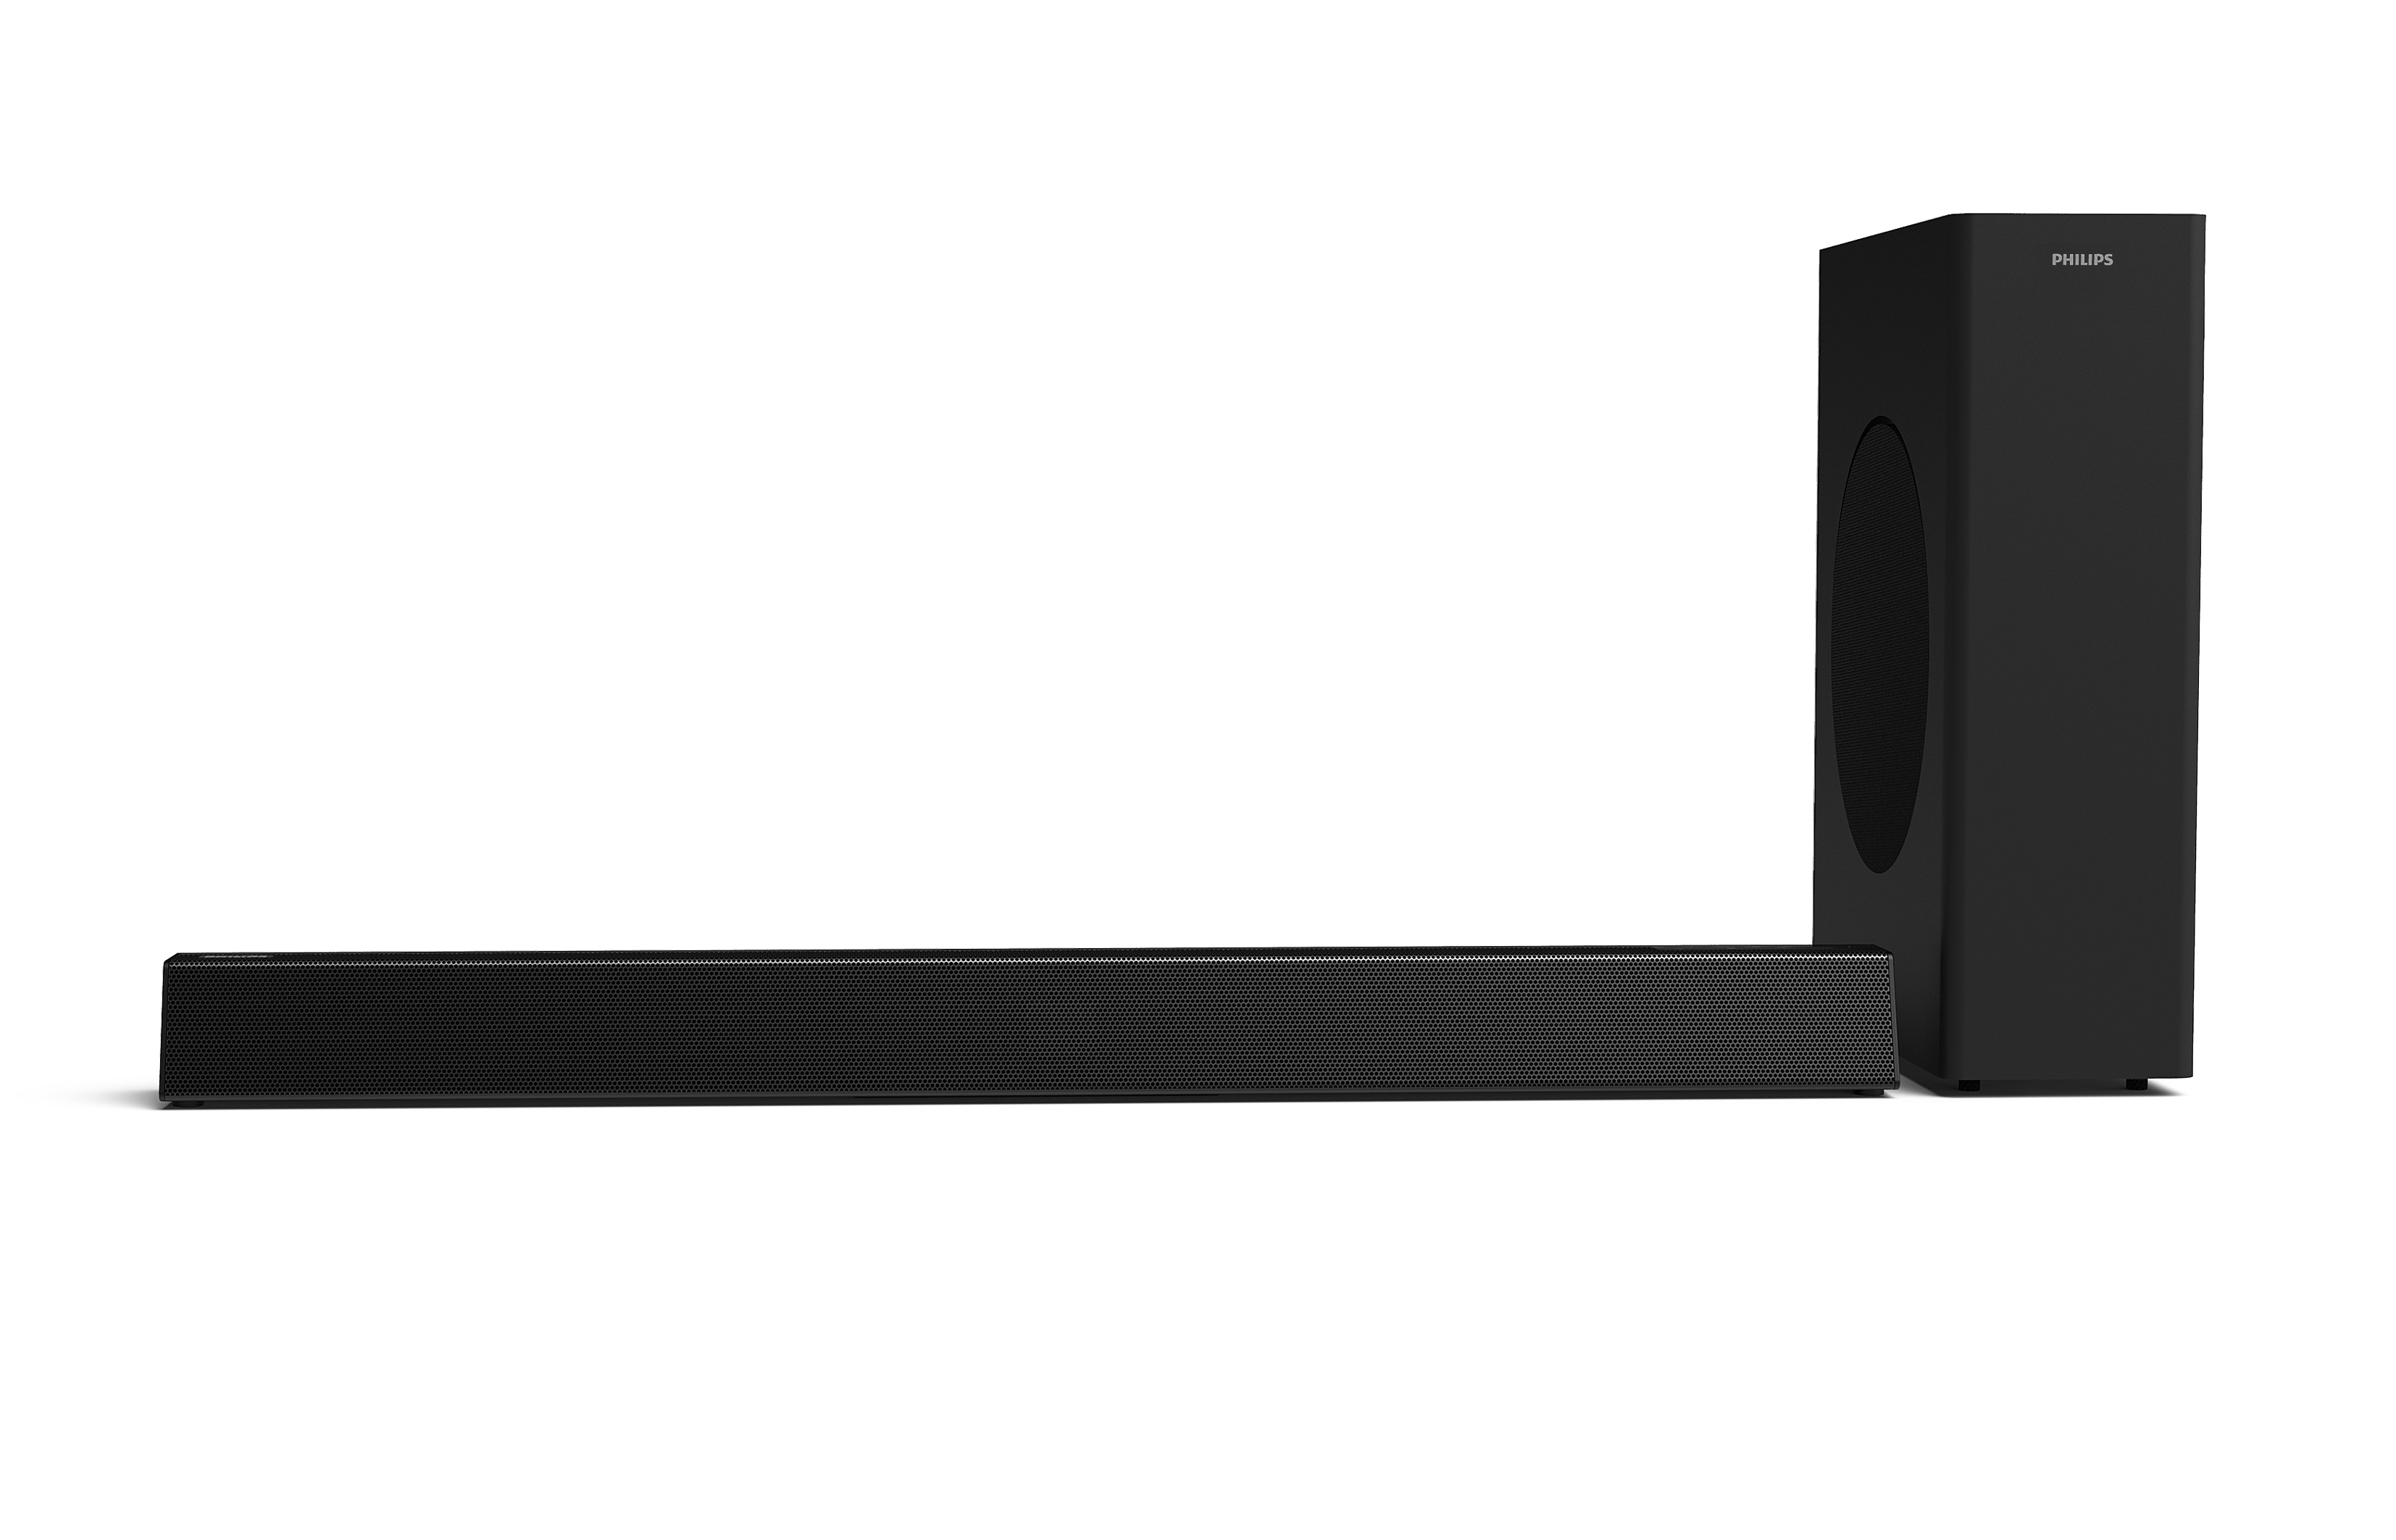 Philips HTL3320 3.1 Channel Dolby Audio Soundbar with Wireless Subwoofer - image 1 of 5